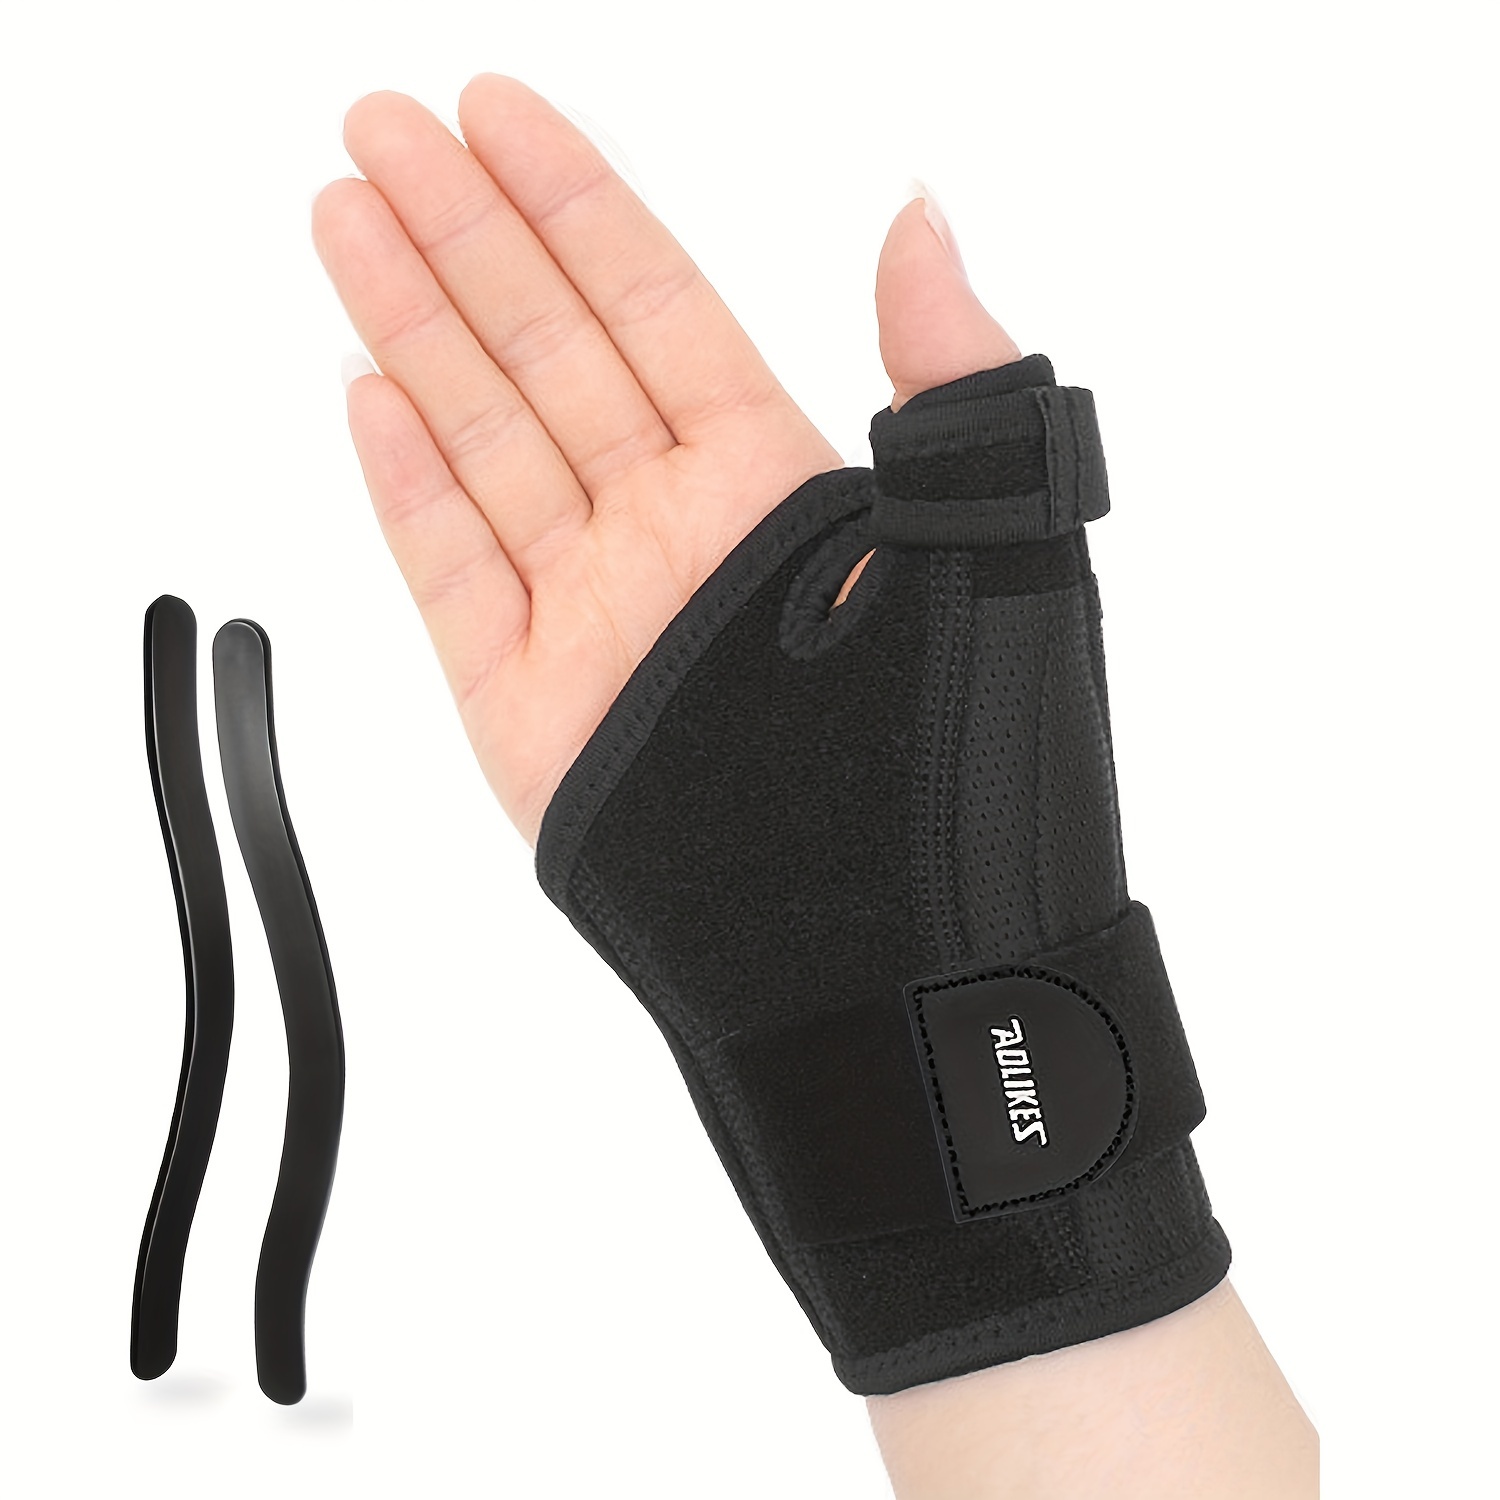 Buy Chekido Adjustable wrist support for pain relief carpal tunnel